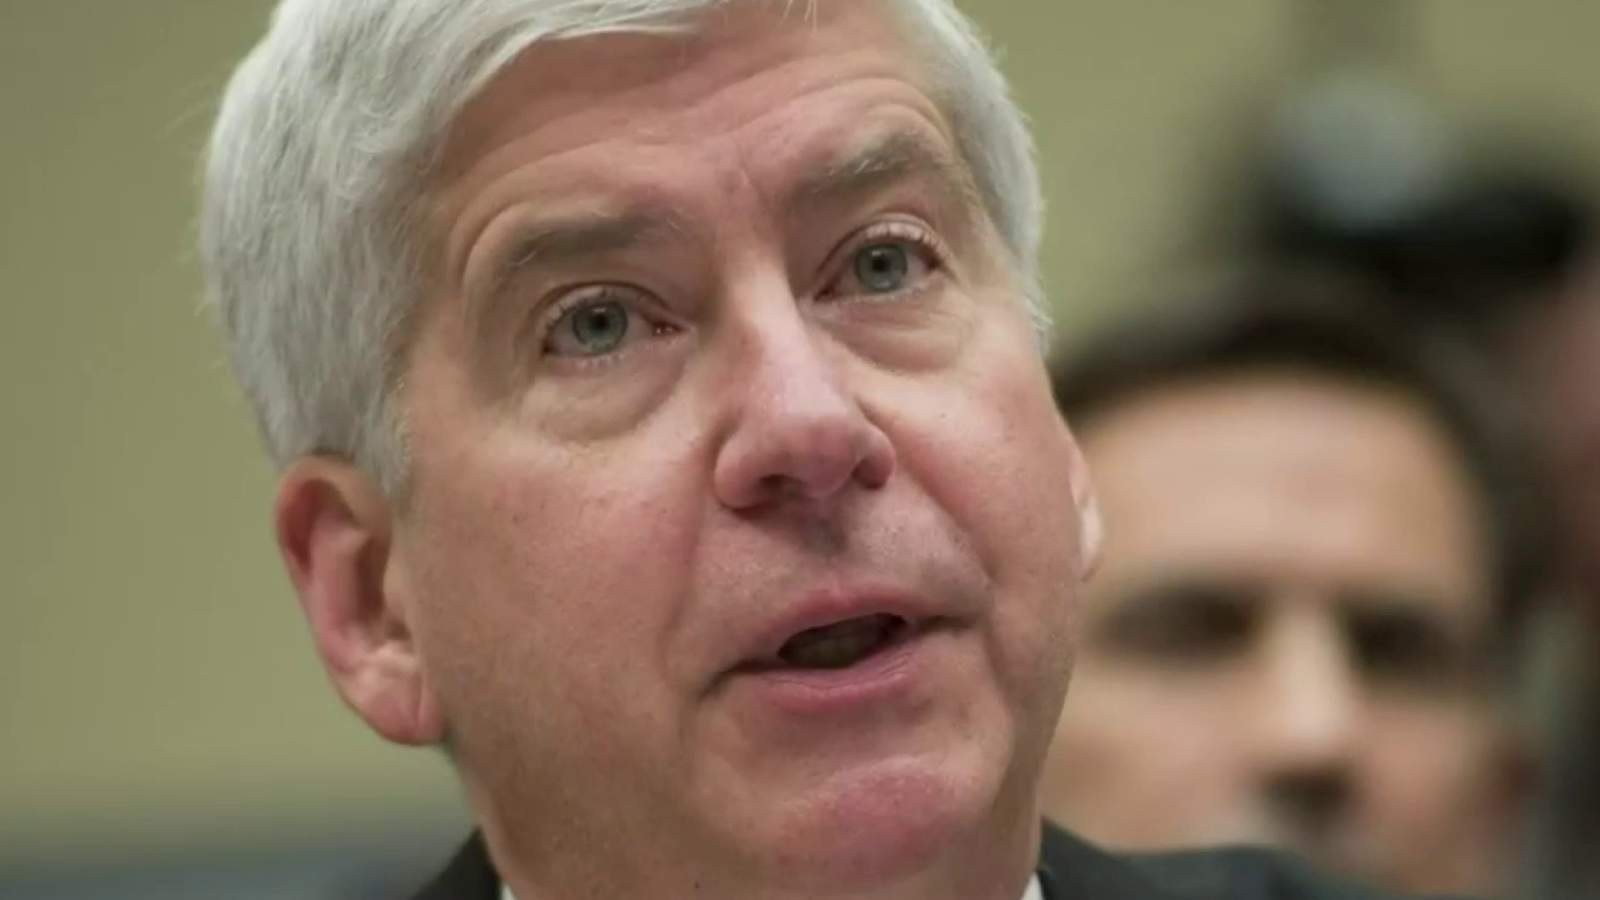 Ex-Michigan Gov. Rick Snyder loses challenge to Flint water charges